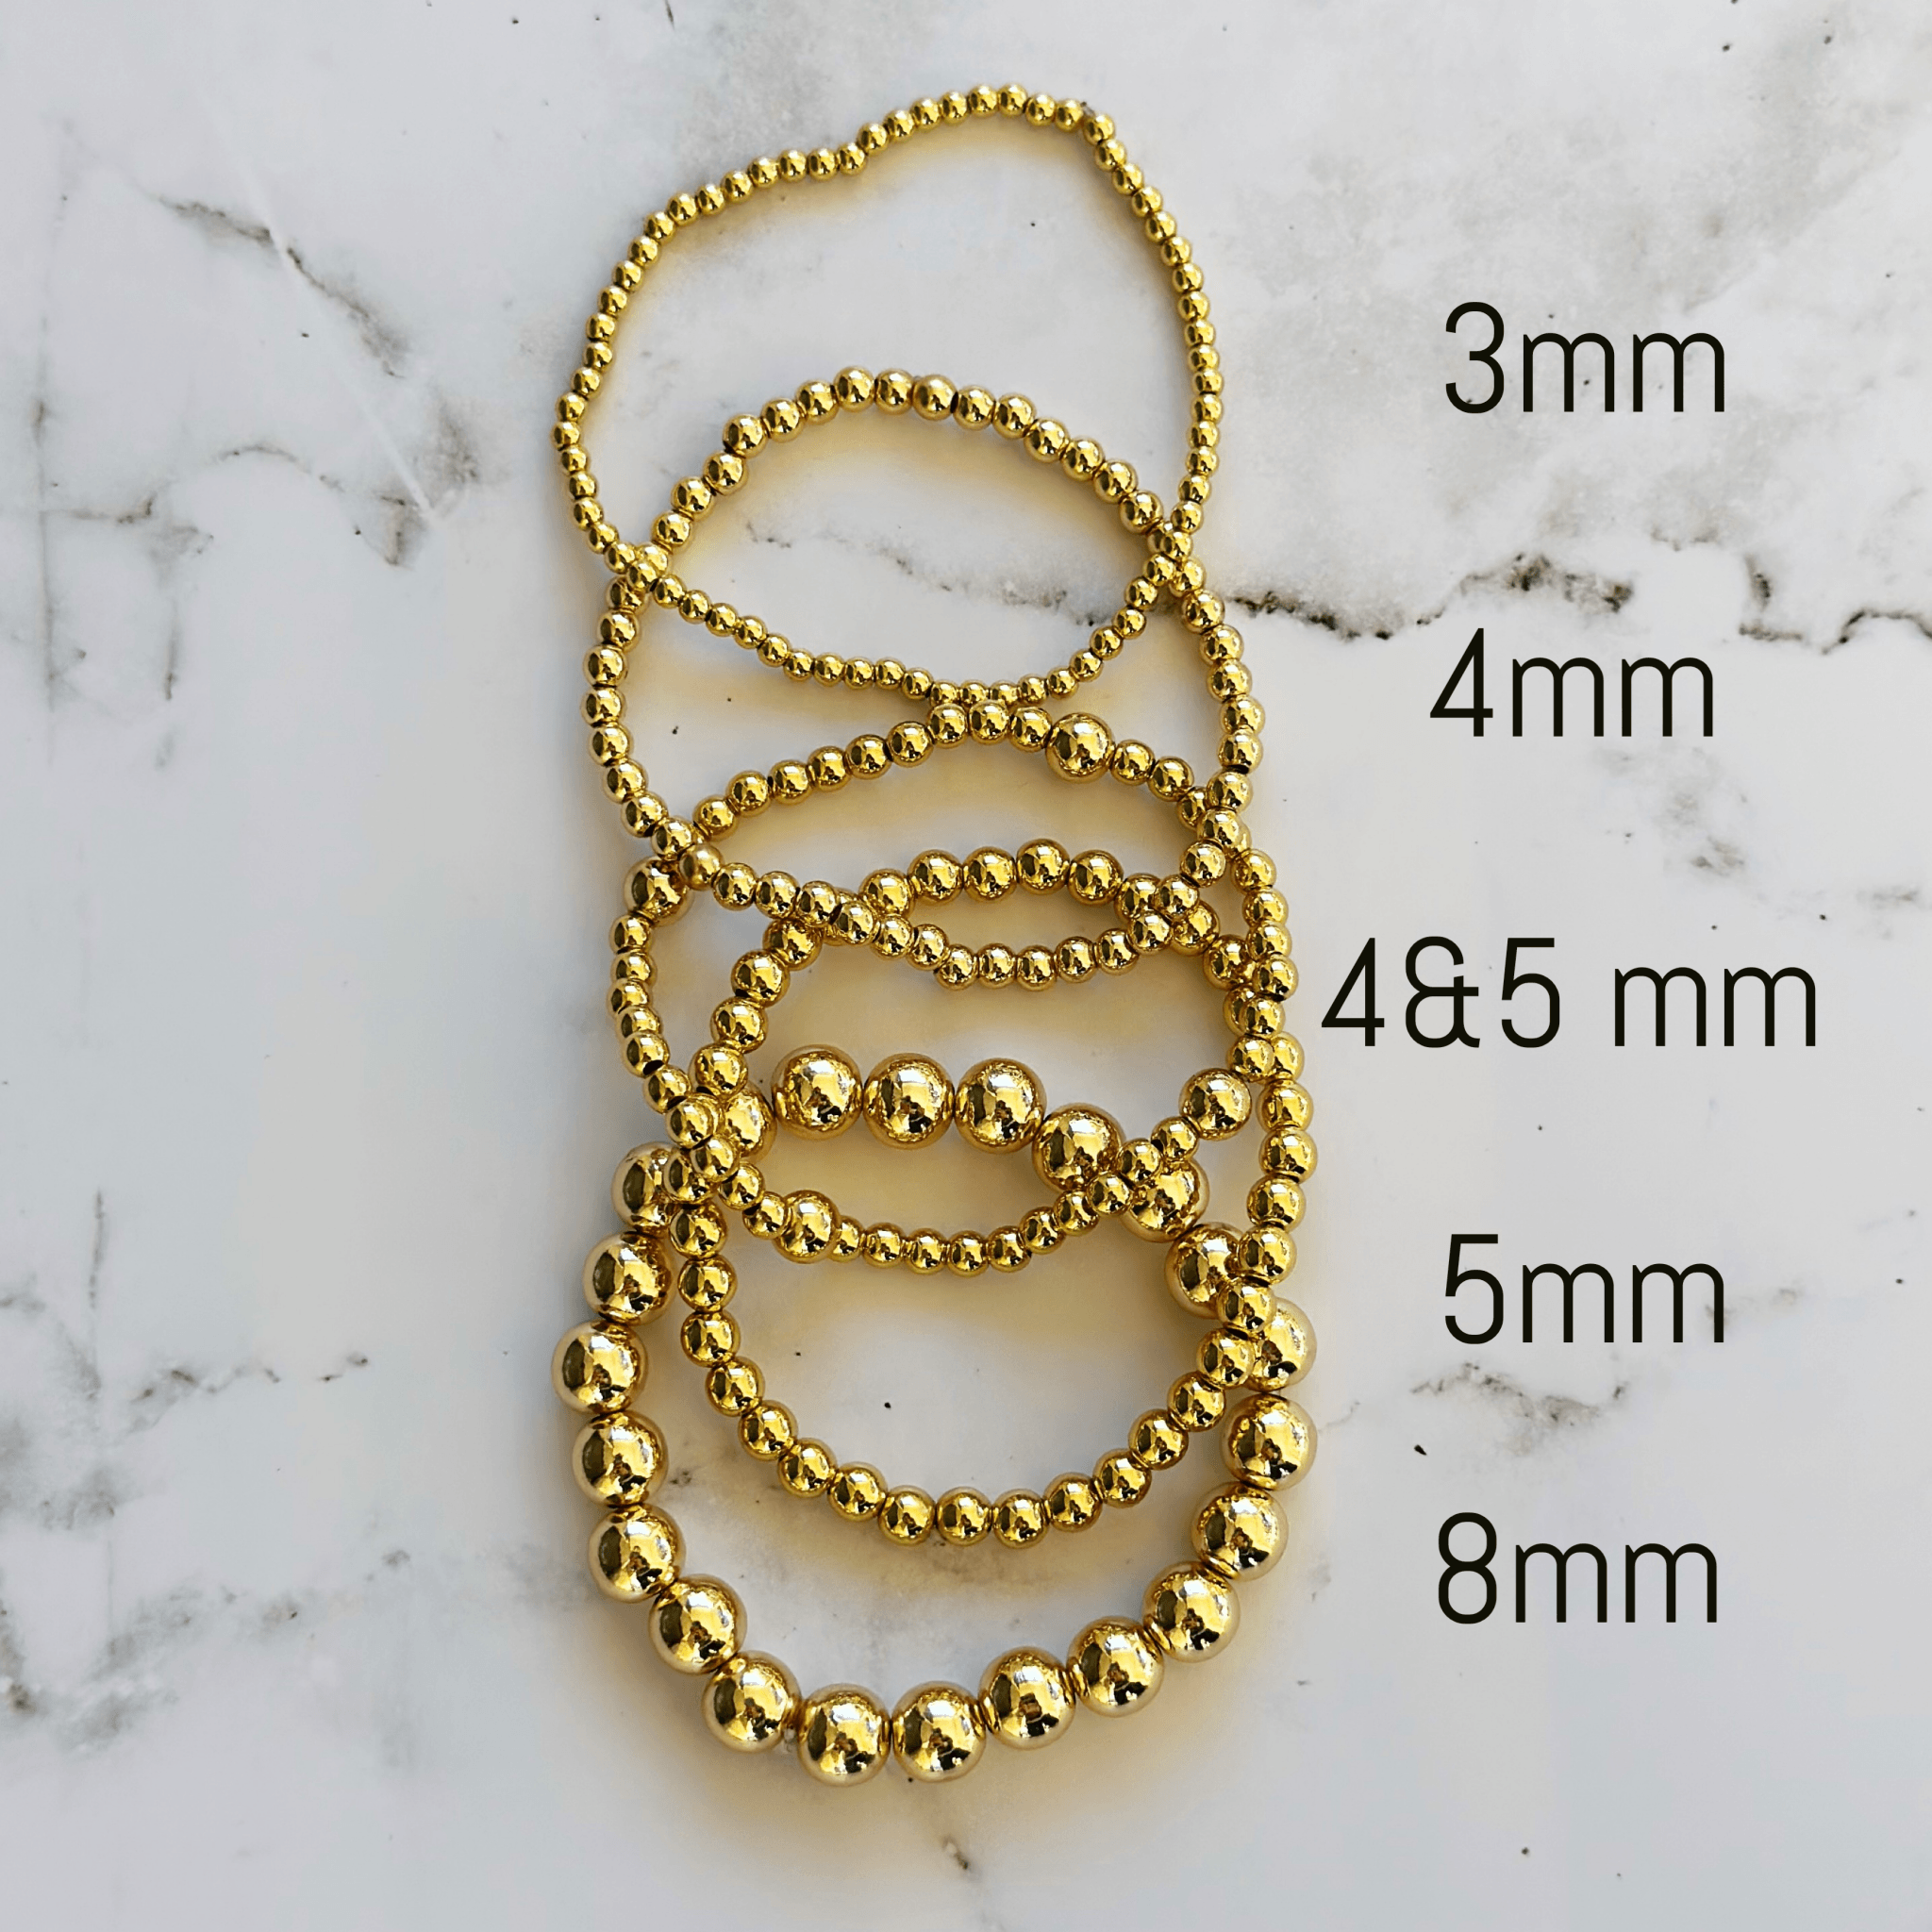 3mm Gold Bead Bracelet - Timeless Style & Quality | Bliss Bayou AVG Adult - 7.0 Inches